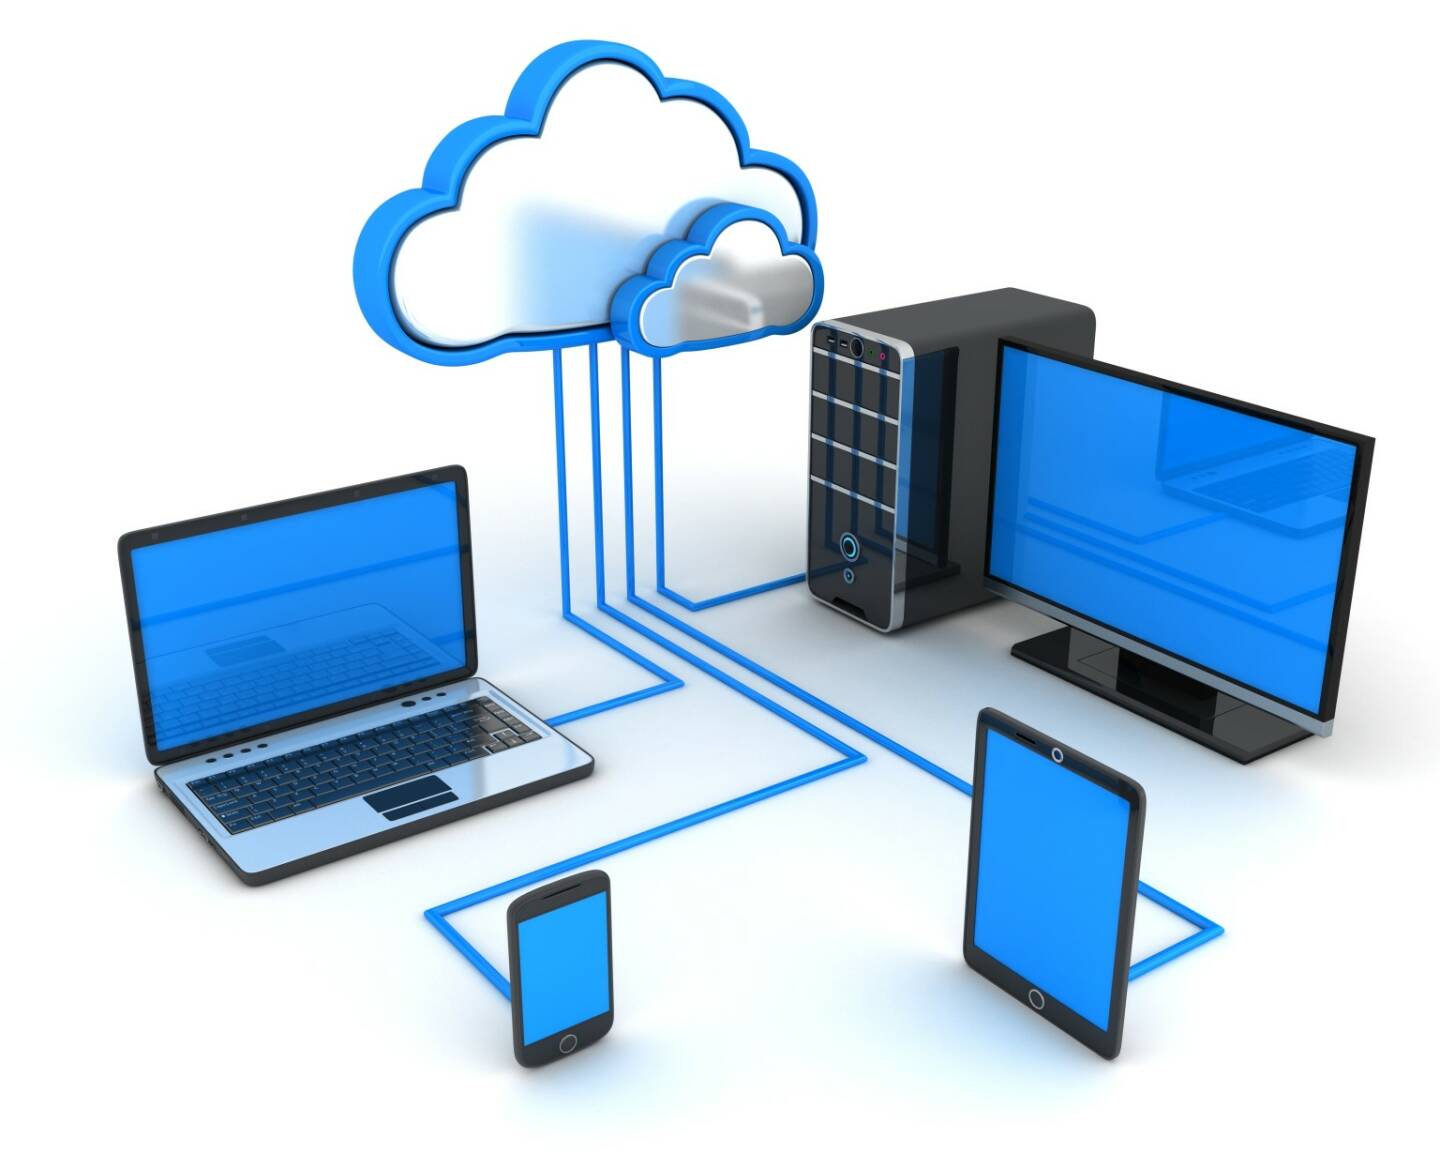 Cloud Storage, Computer, Tablet, Smartphone, Speicher http://www.shutterstock.com/de/pic-215681095/stock-photo-abstract-cloud-storage-done-in-d.html